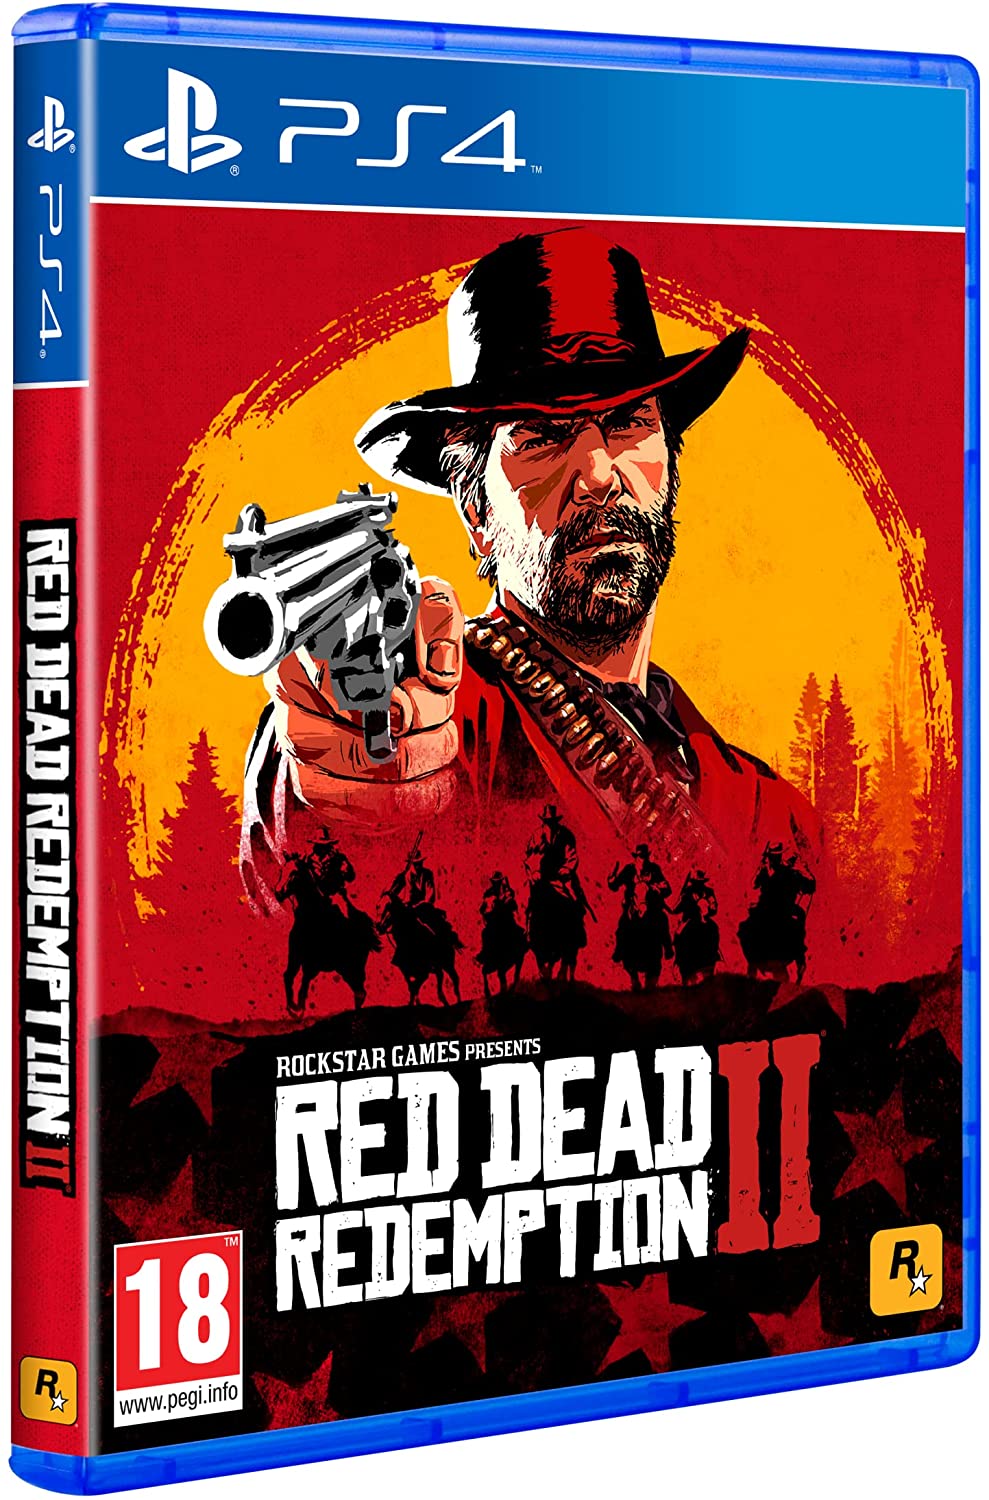 Игра red ps4. Red Dead Redemption 2 ps4. Диск РДР 2 пс4. Red Dead Redemption 2 на пс4. Rdr 2 ps4 диск.